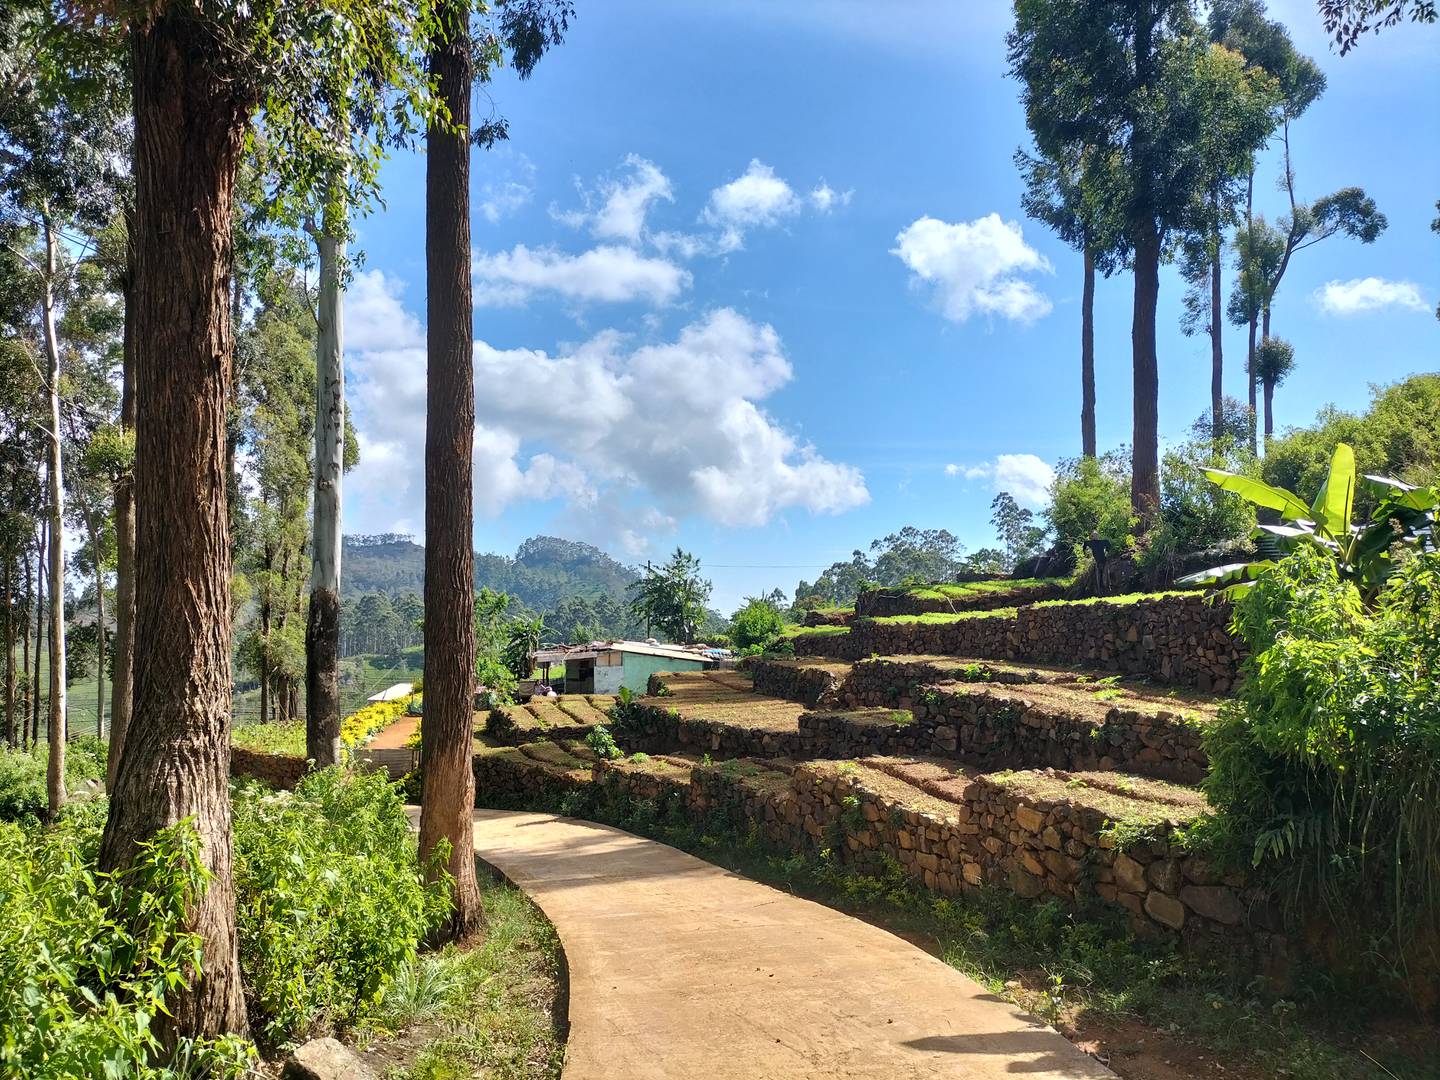 Sri Lanka's new long-distance walking Pekoe Trail, winds through the central highlands. Photo: Miguel Cunat